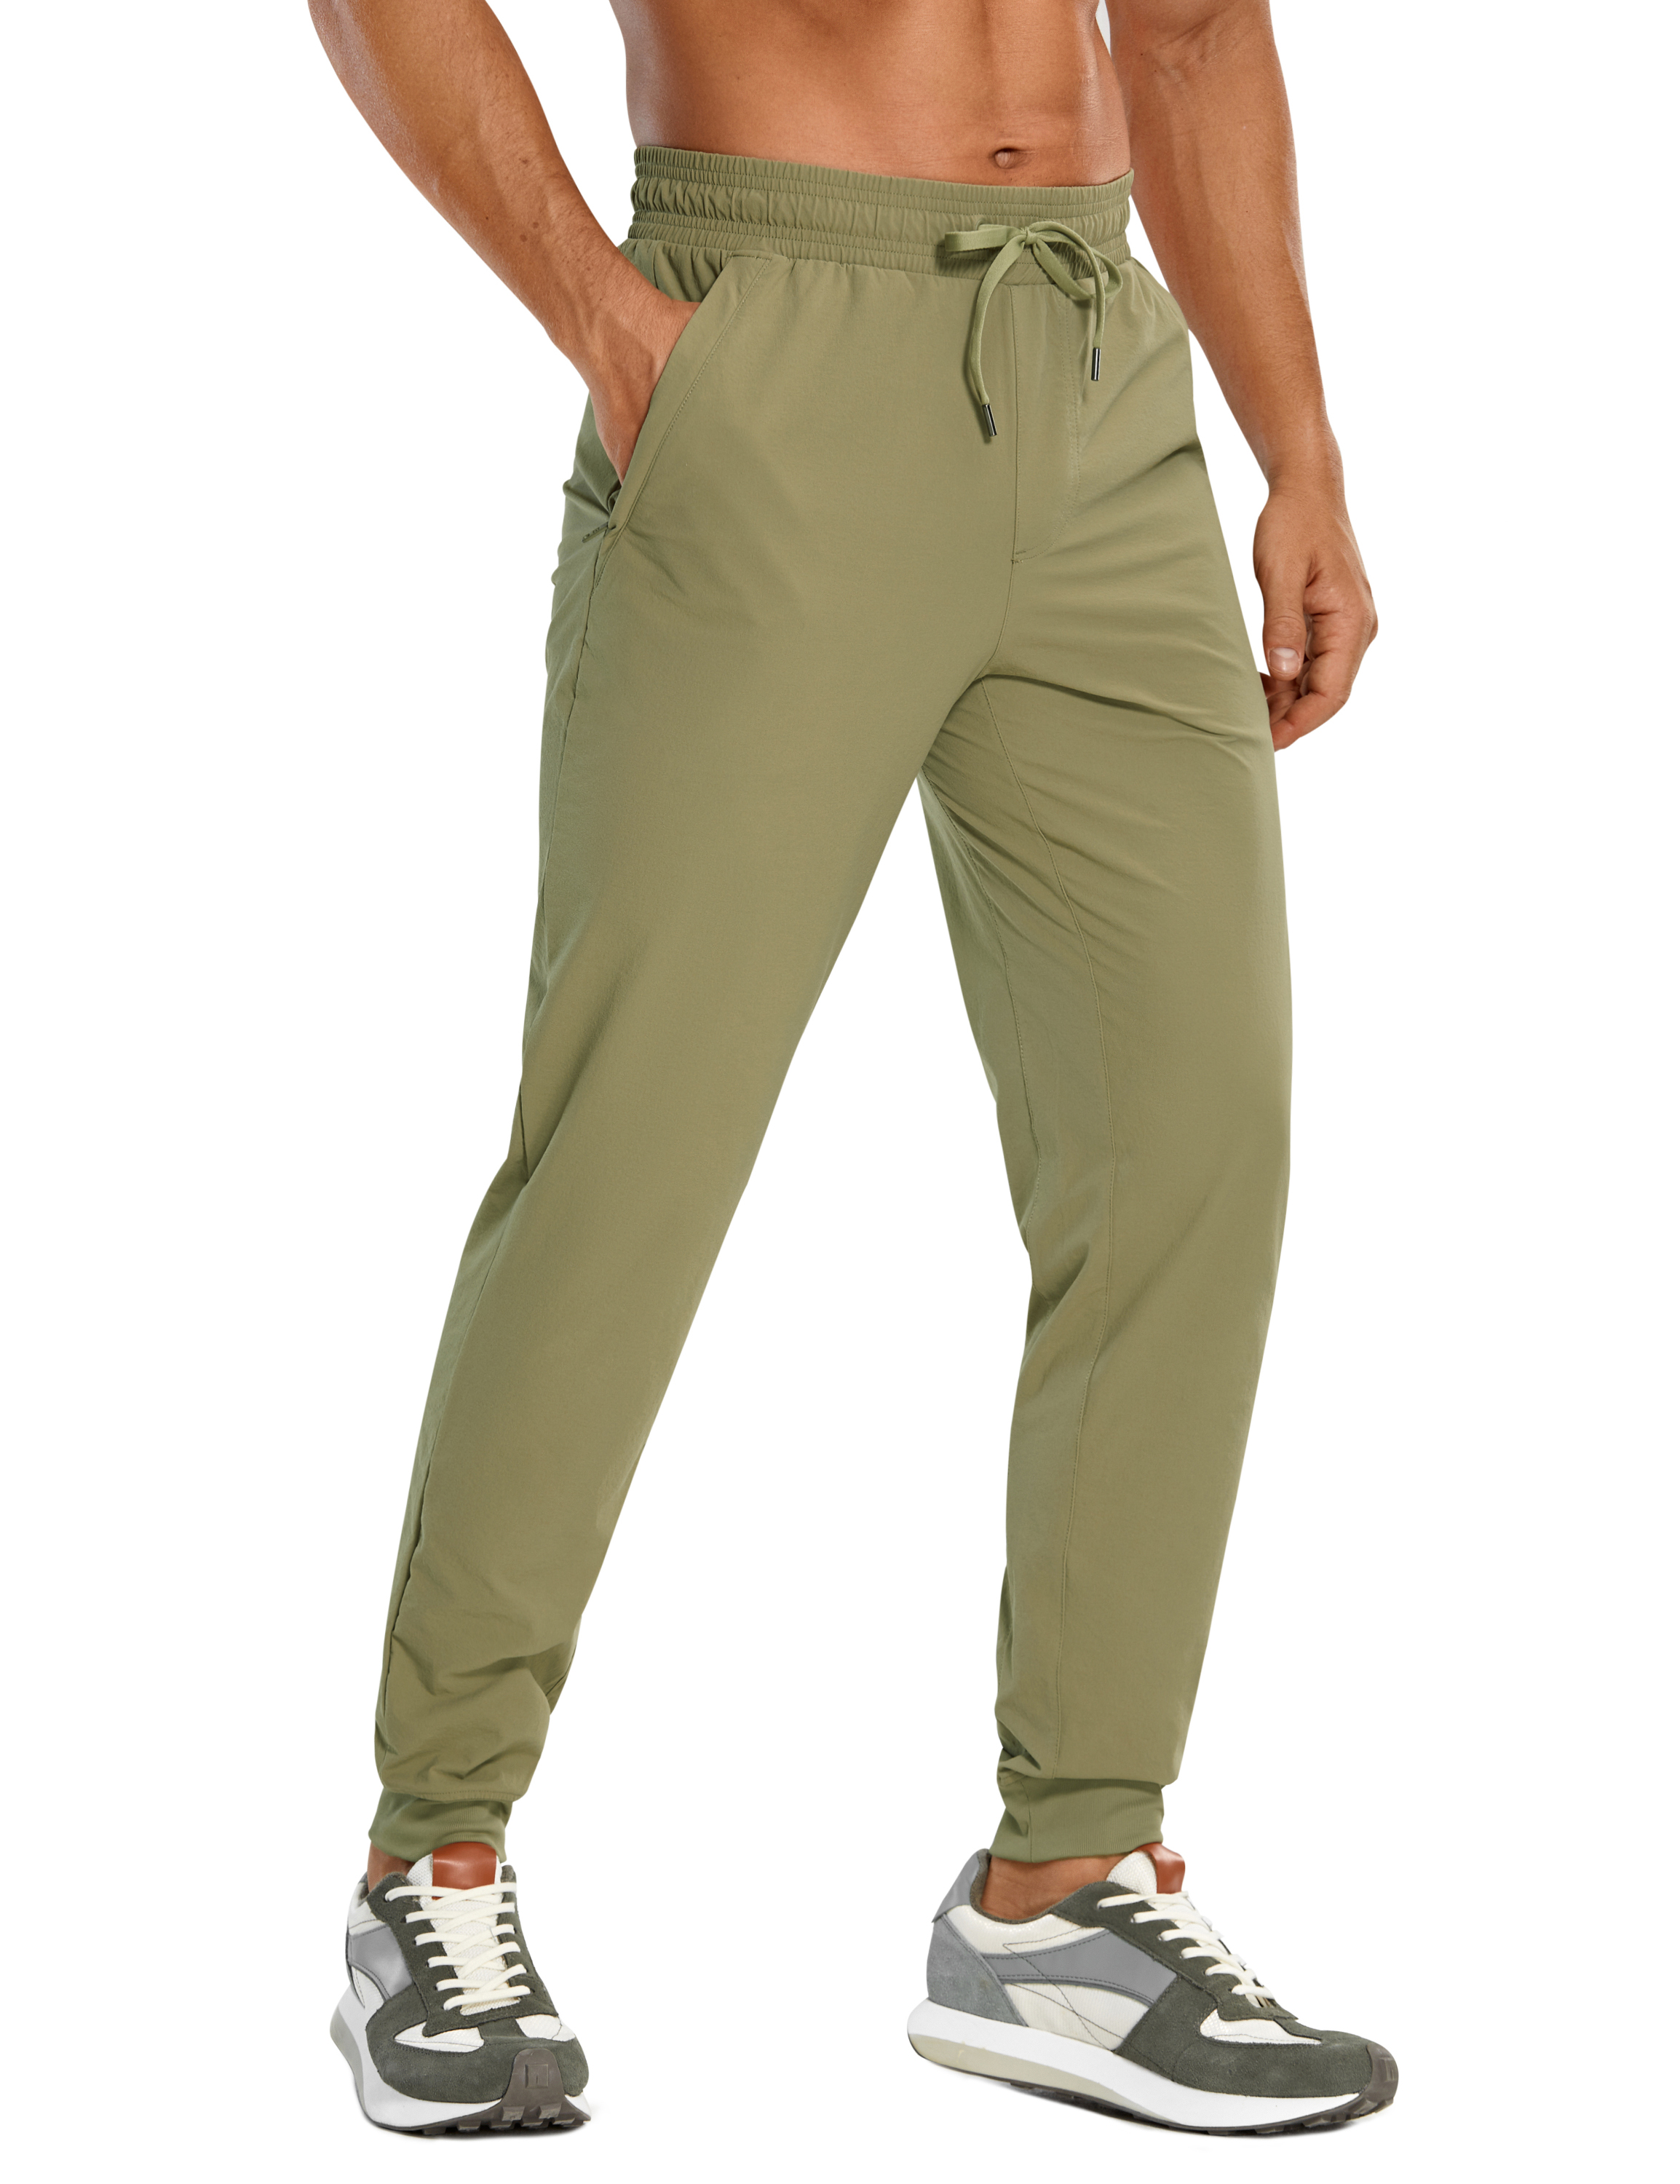 CRZ YOGA Lightweight Men's Golf Joggers 29 Inches Track Pants with Zip  Pockets